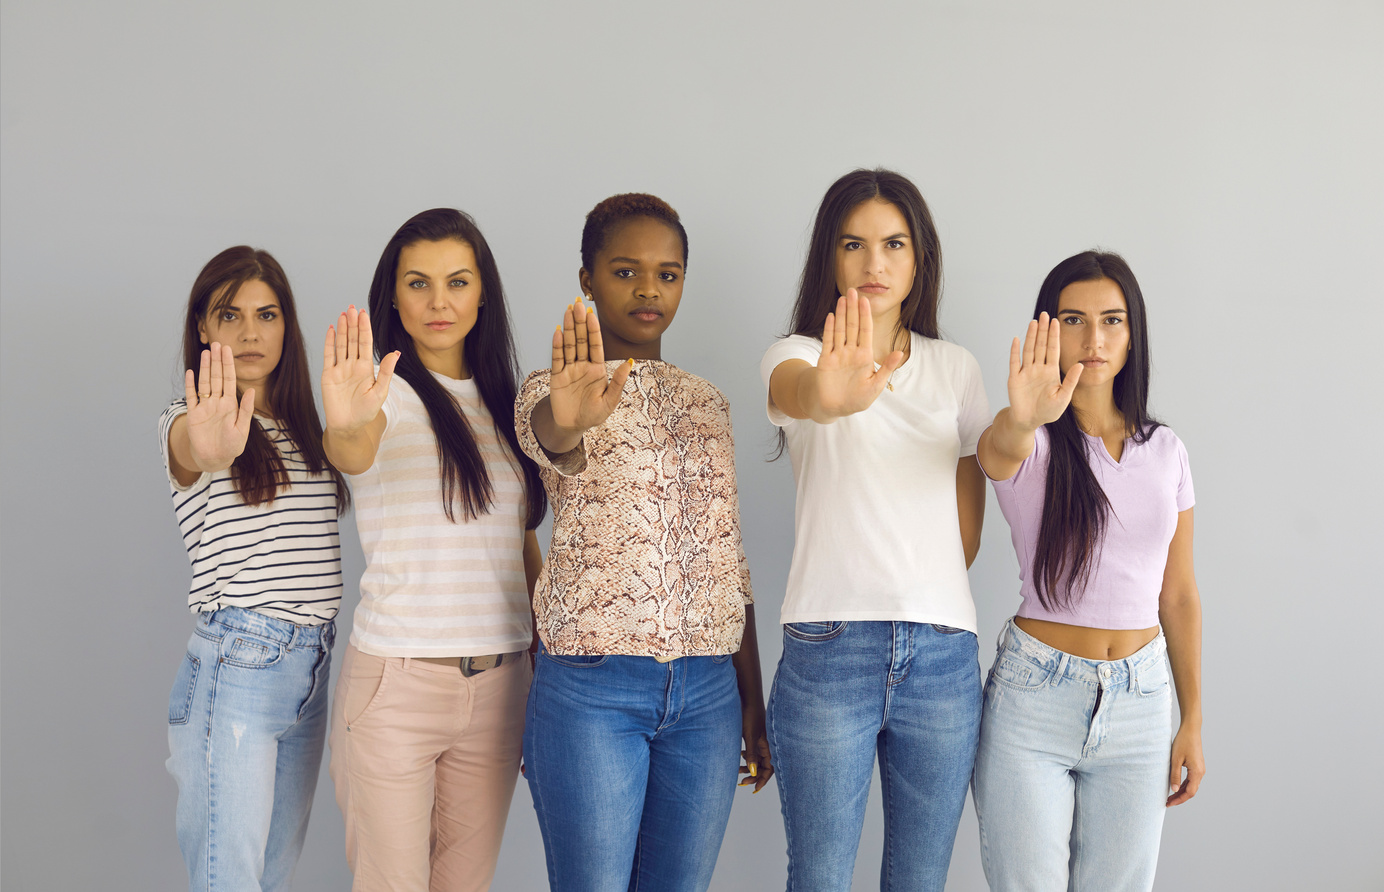 Group of Serious Women Doing Stop Hand Sign Gesture Saying No to Sexism and Violence